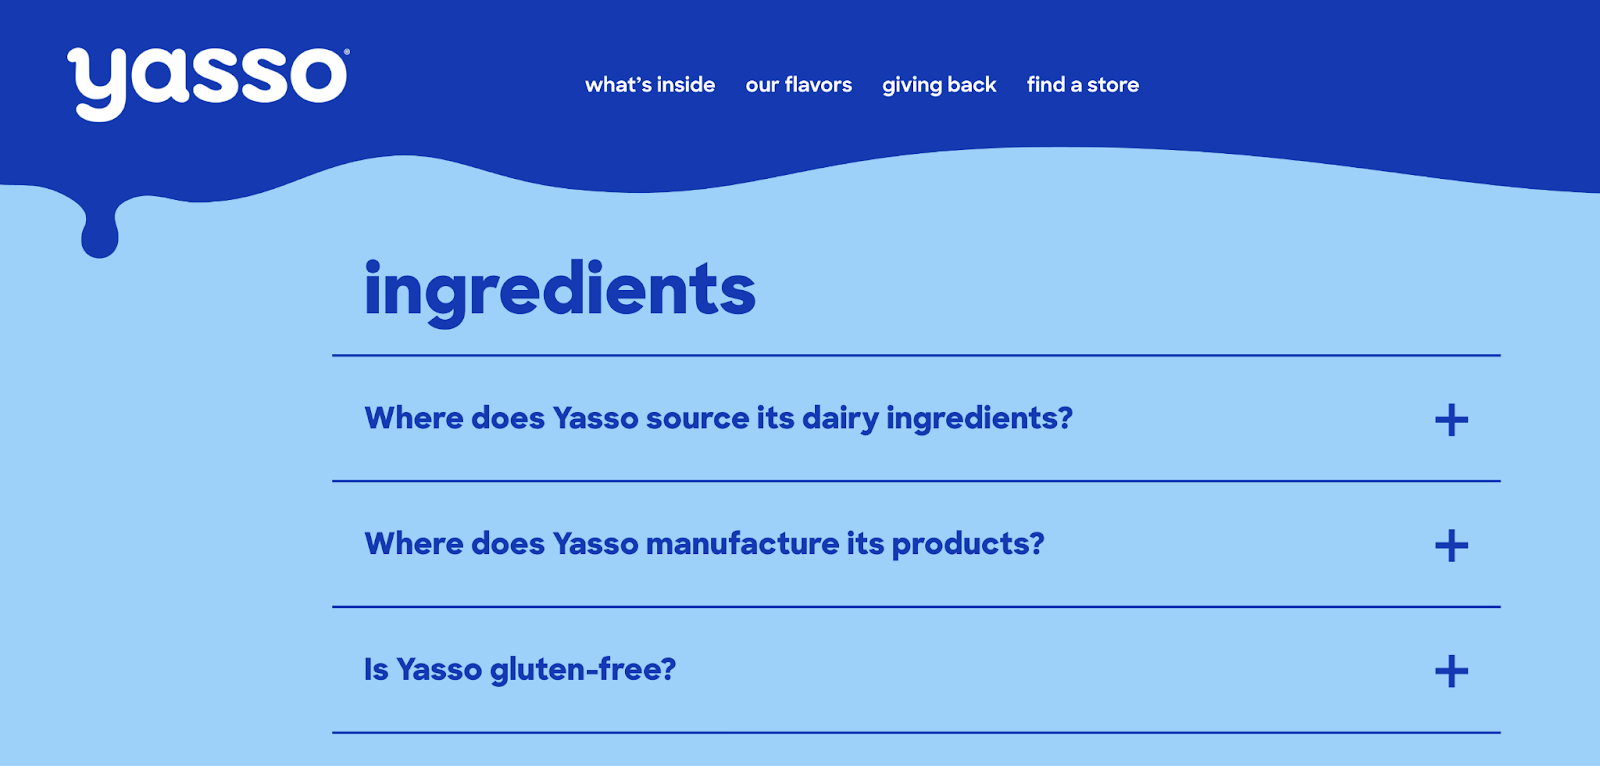 yasso drop down menu reveals answers to questions about ingredients